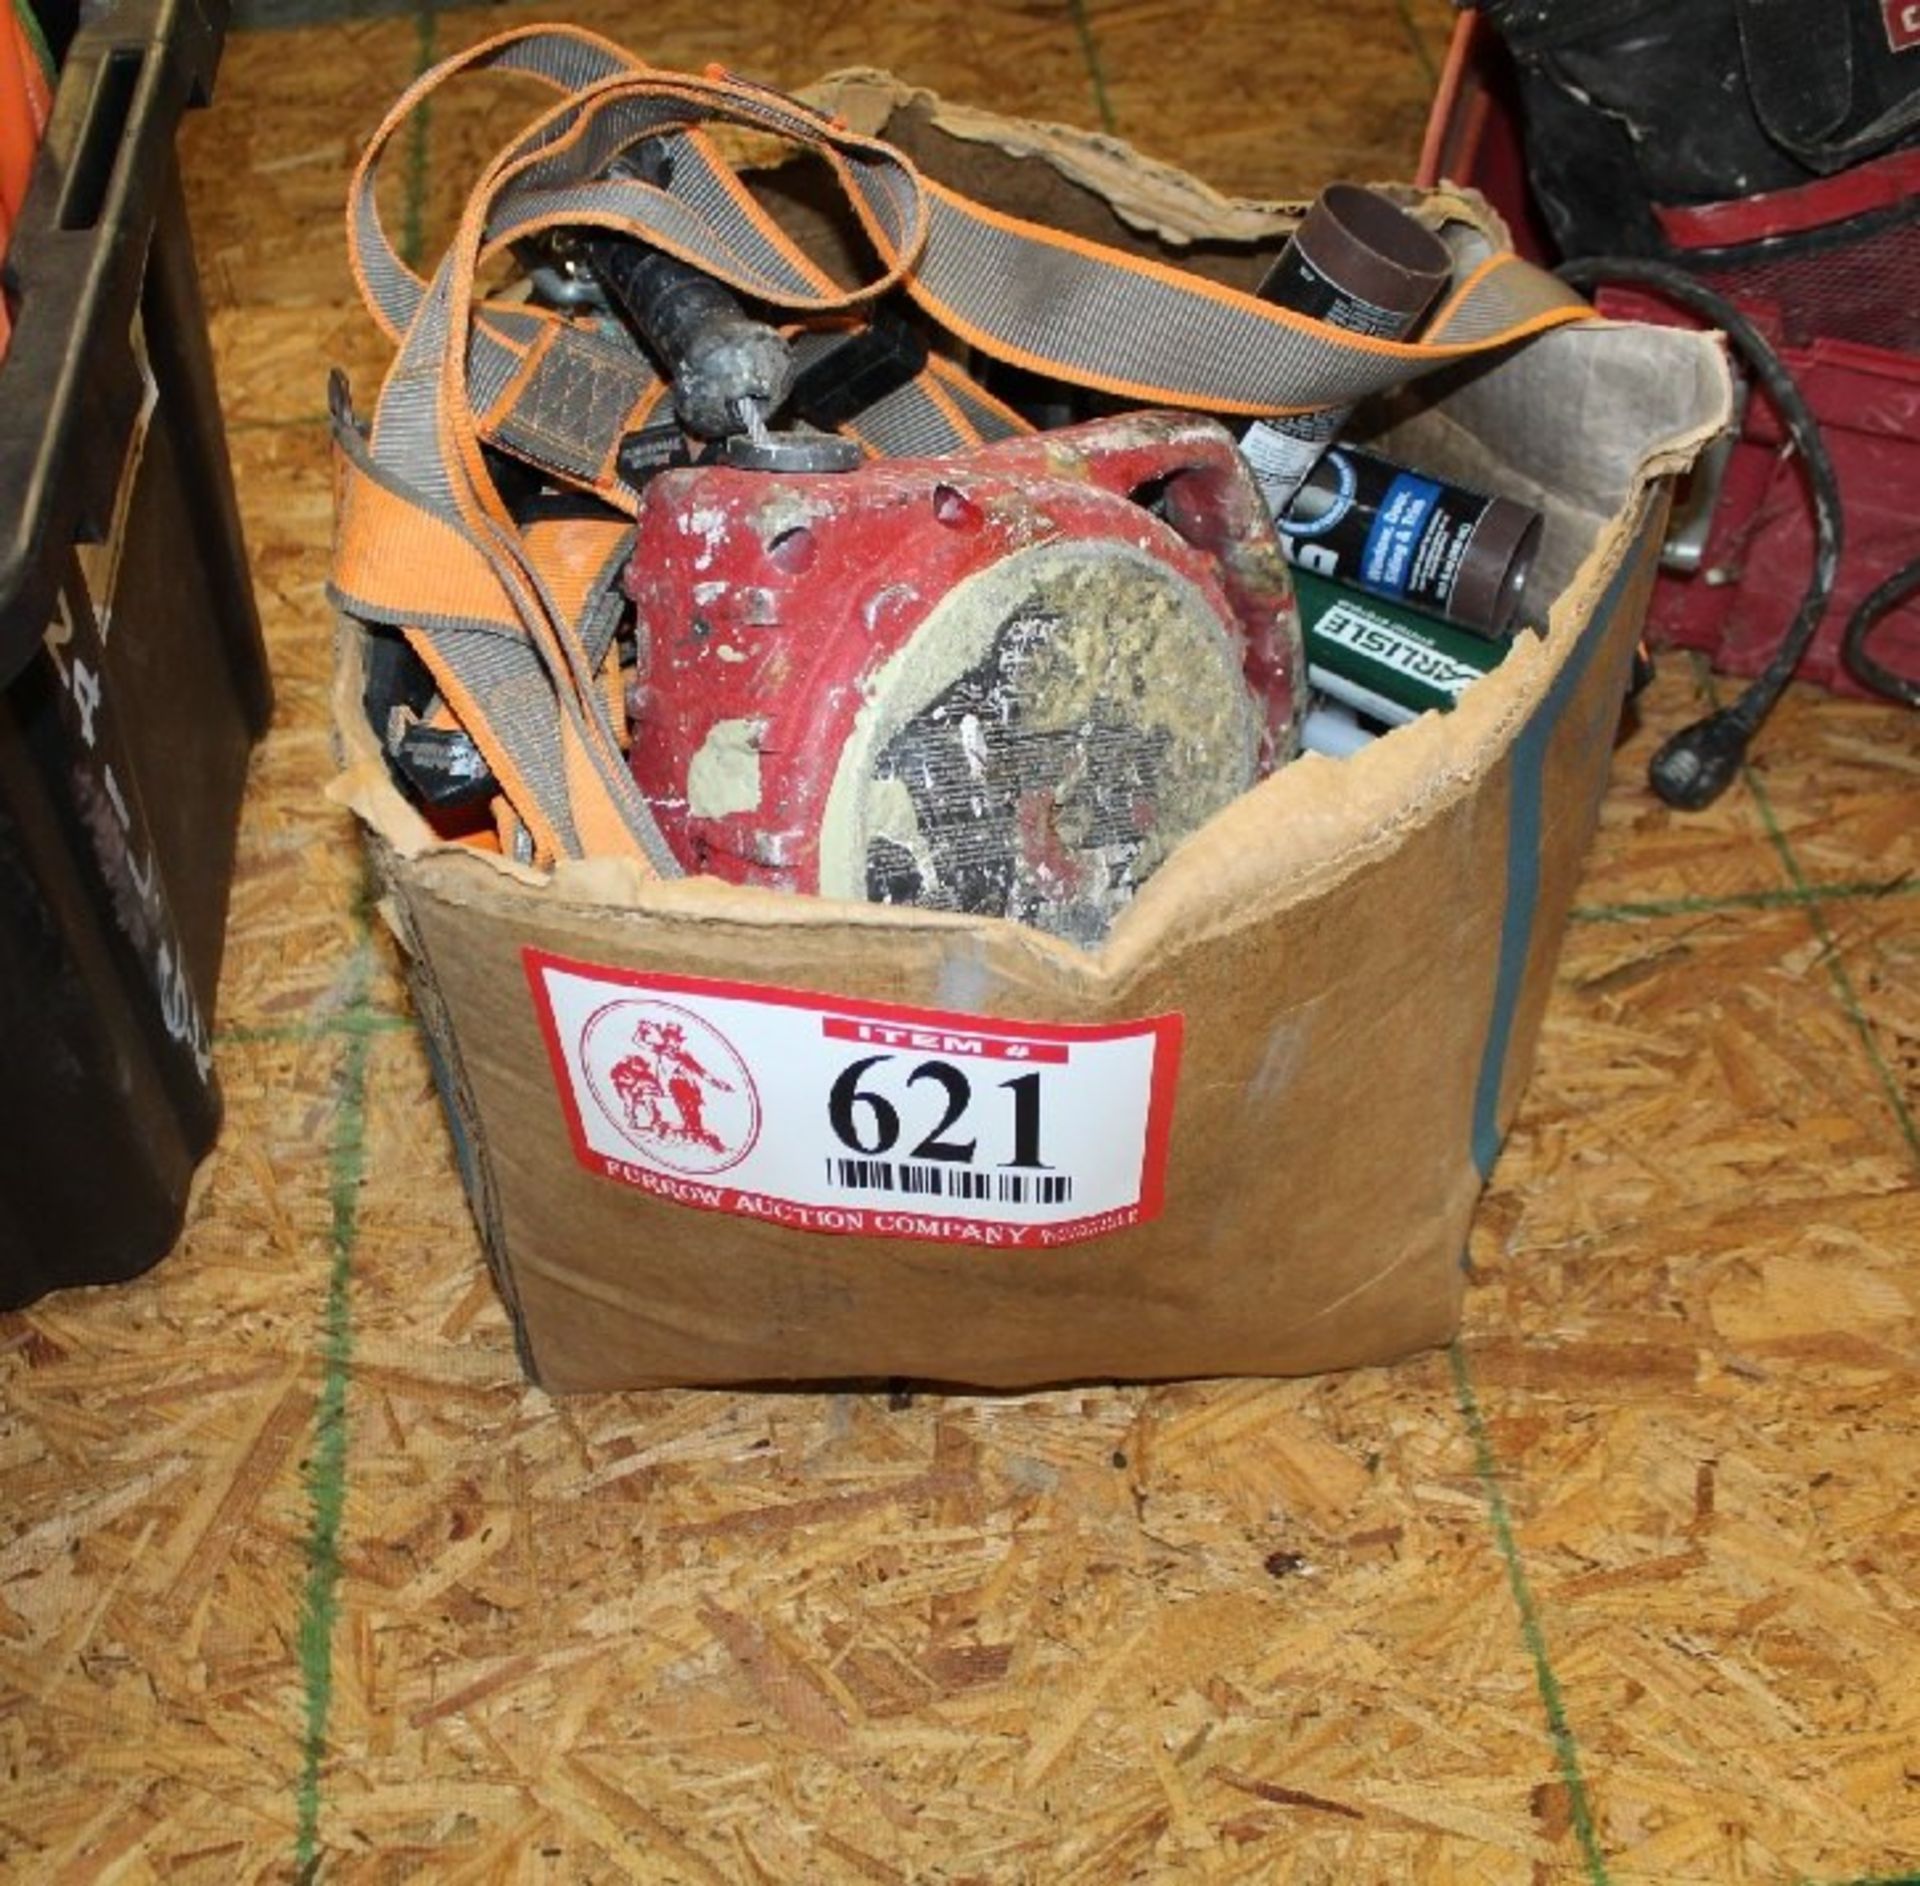 Contents of Box, Safety Harnesses & Fall Protection Gear